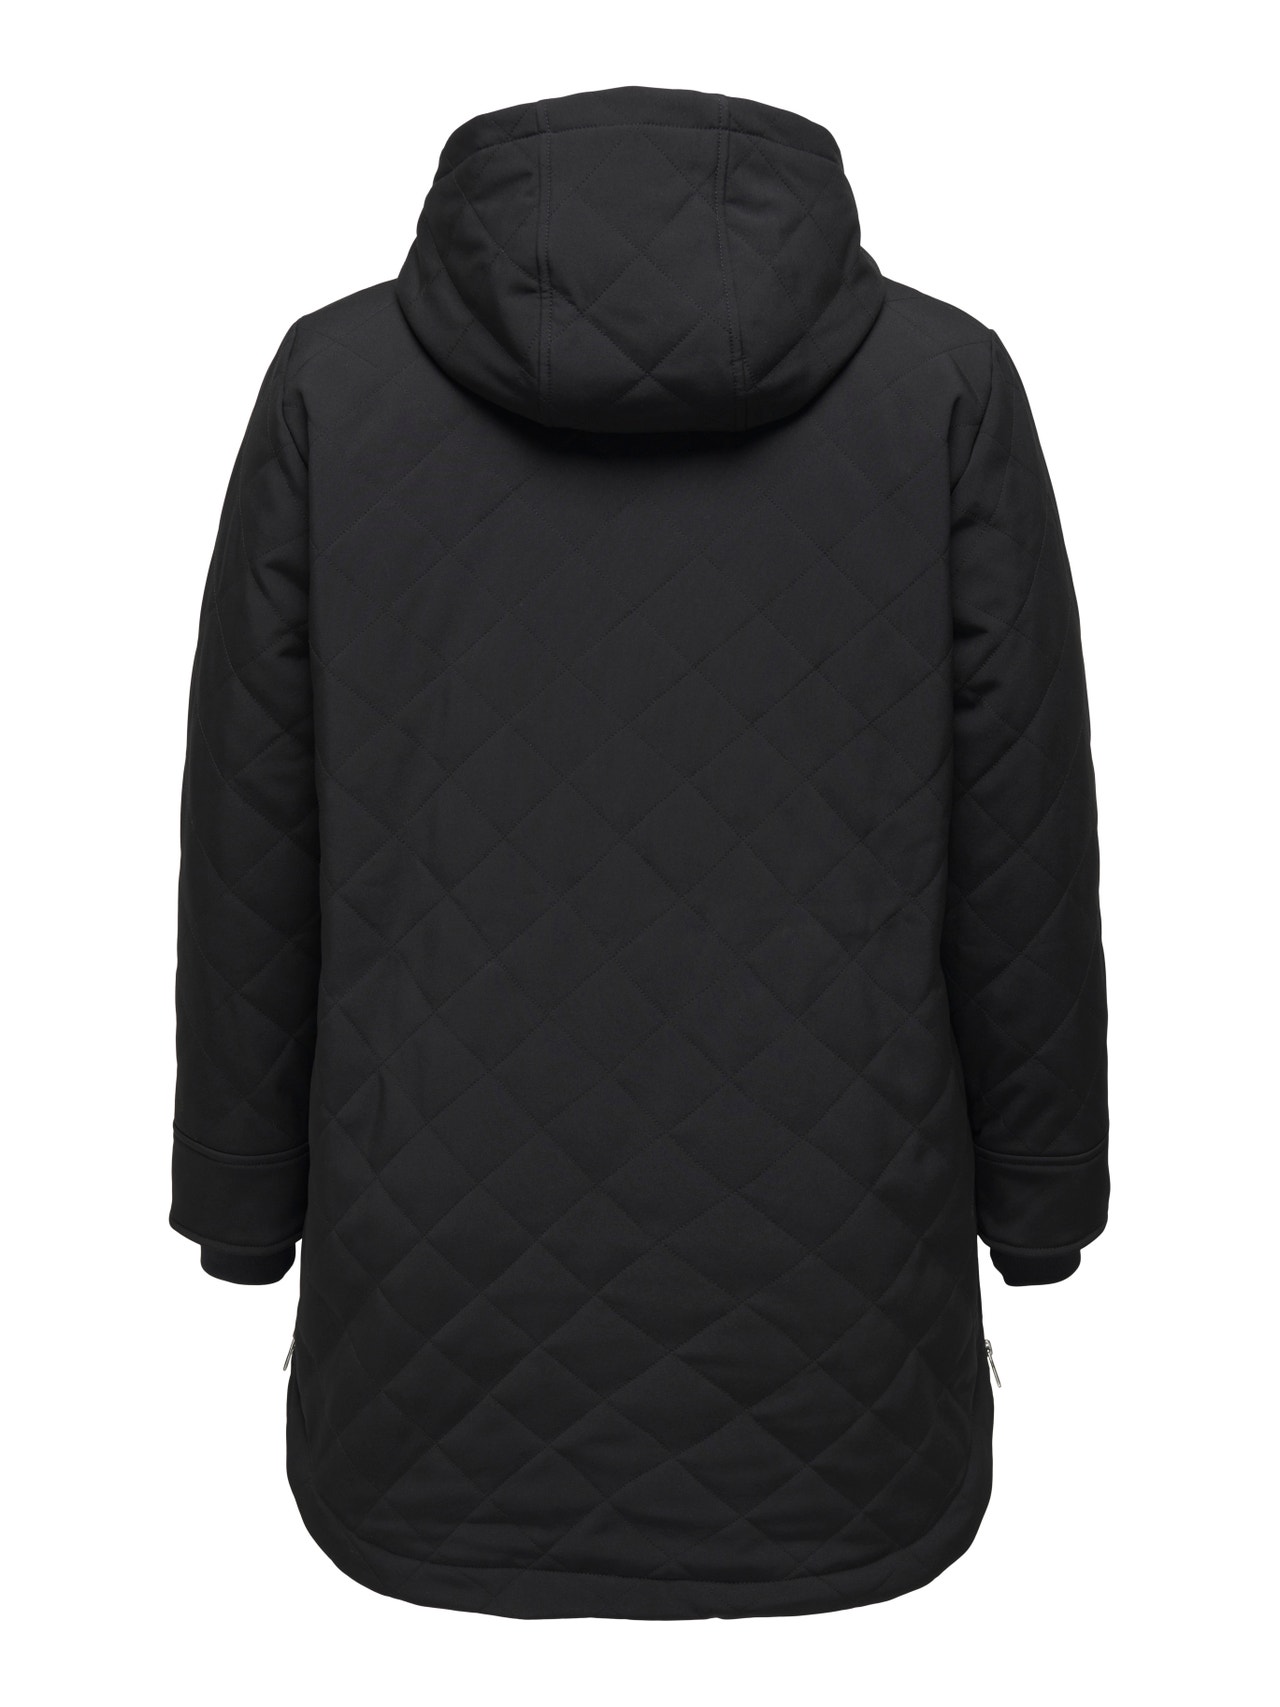 ONLY Curvy Quilted jacket -Black - 15277475